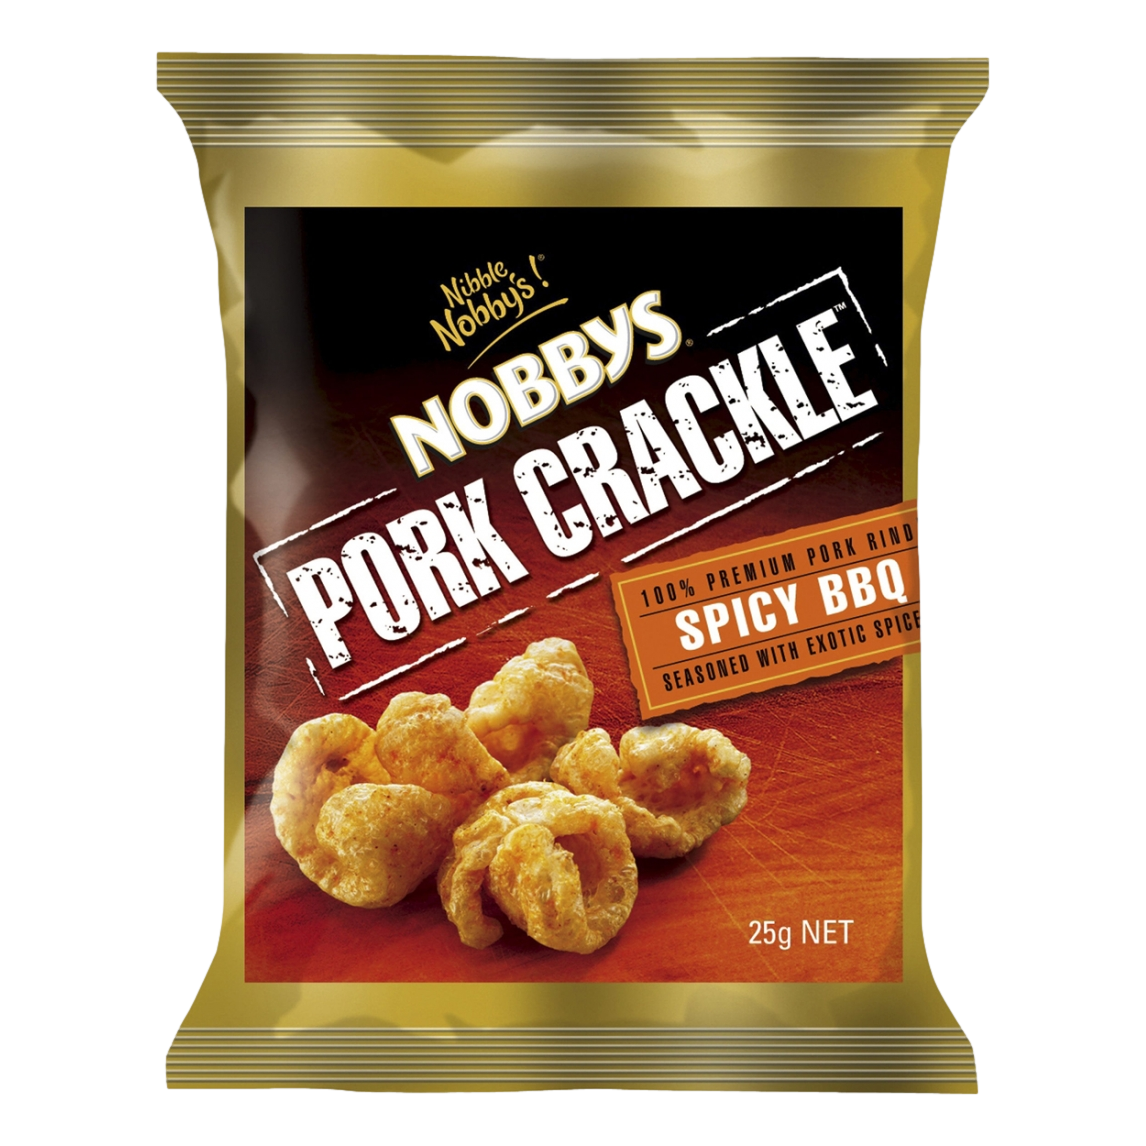 Nobby's Spicy BBQ Pork Crackle 25g